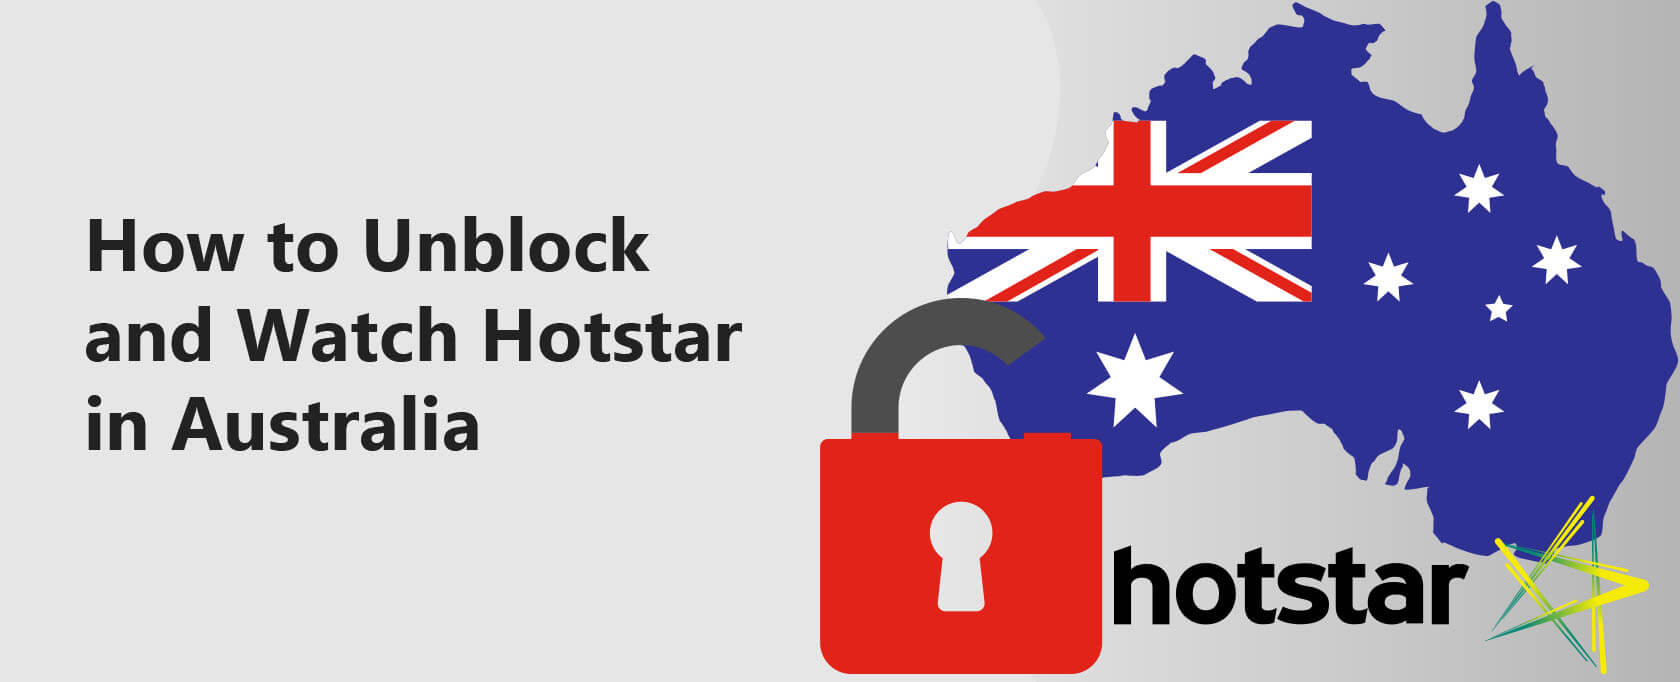 How to Unblock and Watch Hotstar in Australia